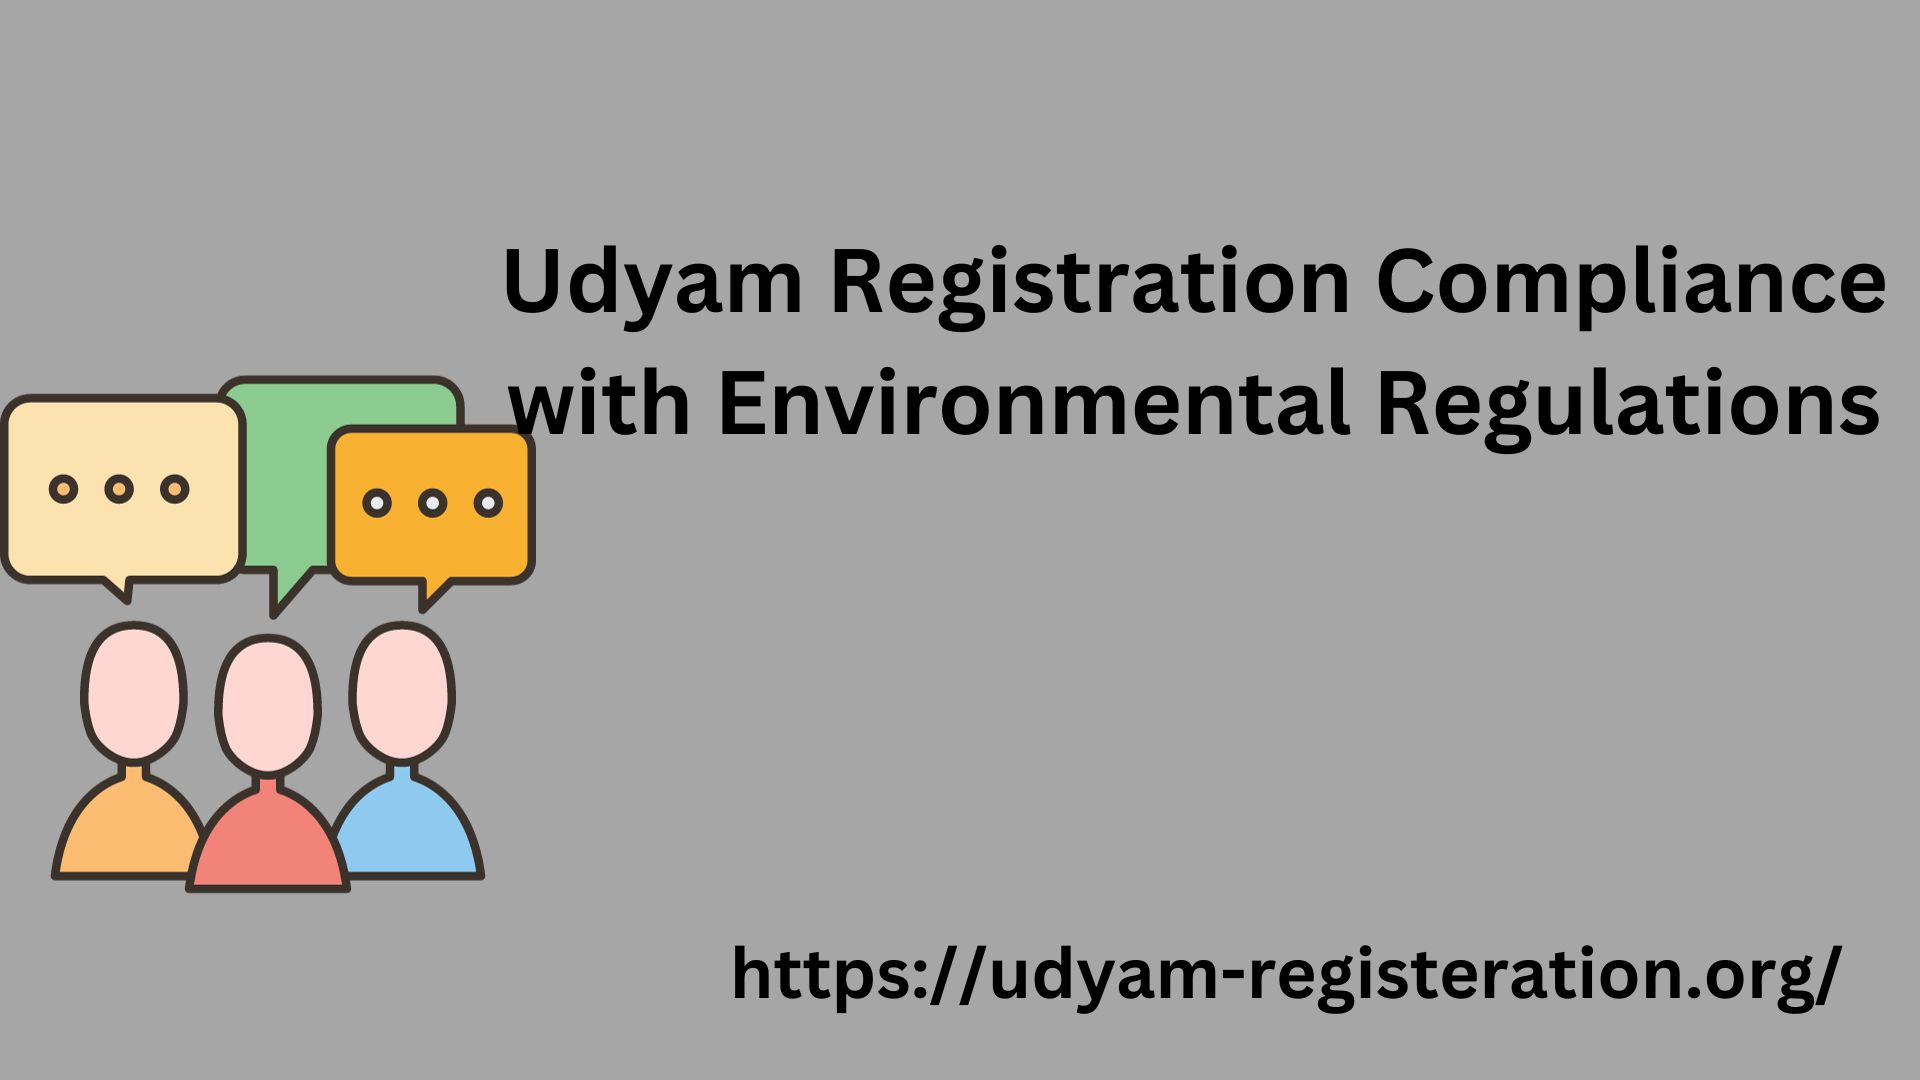 Udyam Registration Compliance with Environmental Regulations